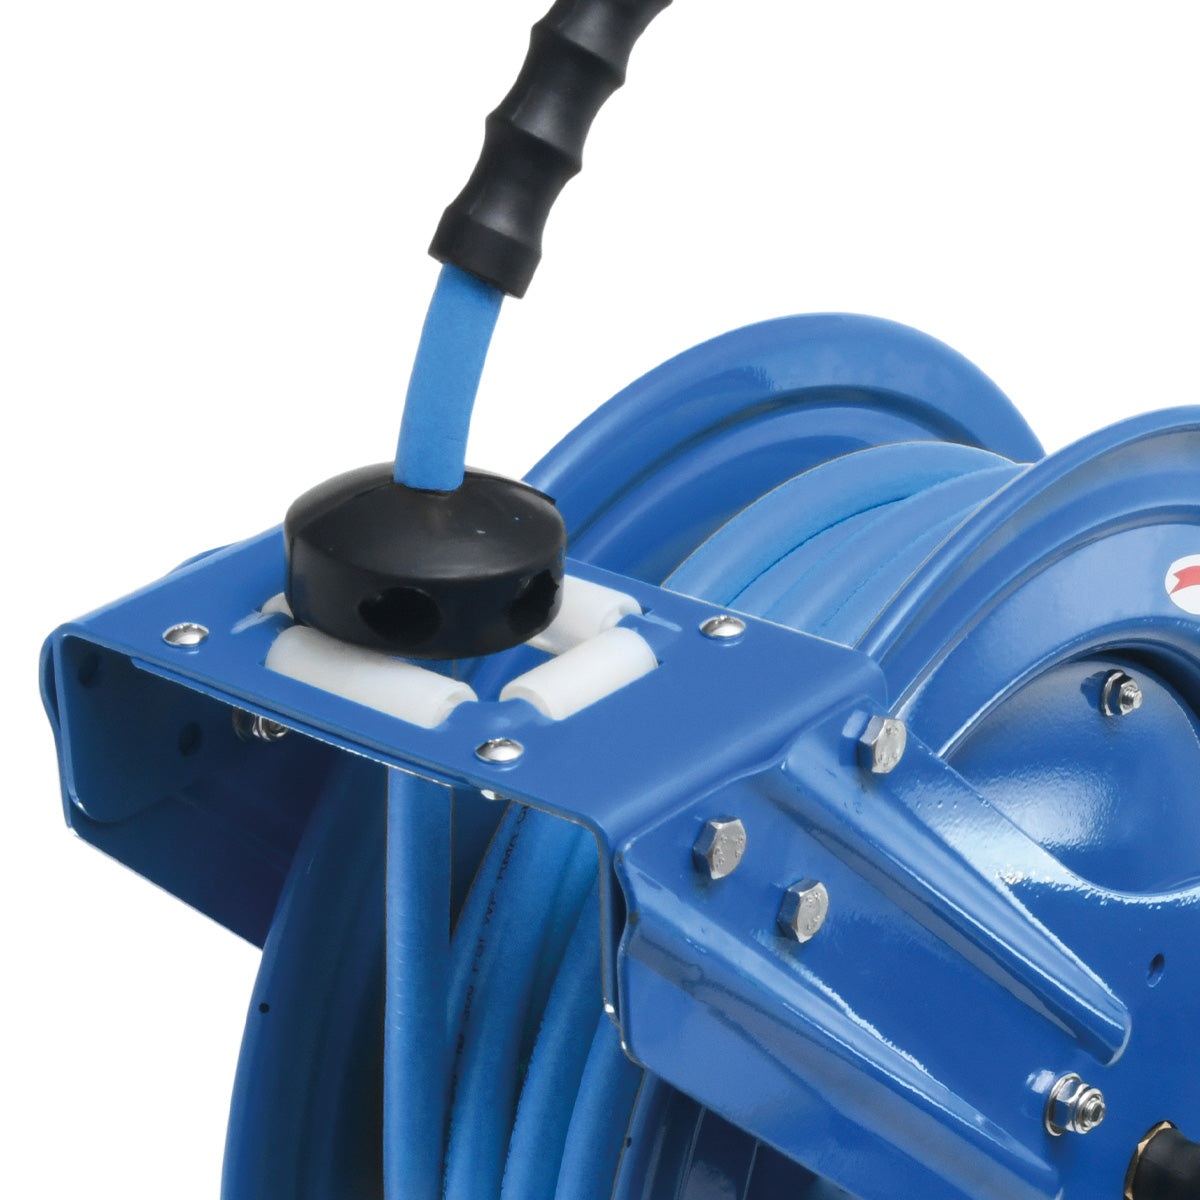 BluBird Air Hose Reel 3/8" Retractable Dual Arm Heavy Duty with Rubber Hose 300 PSI